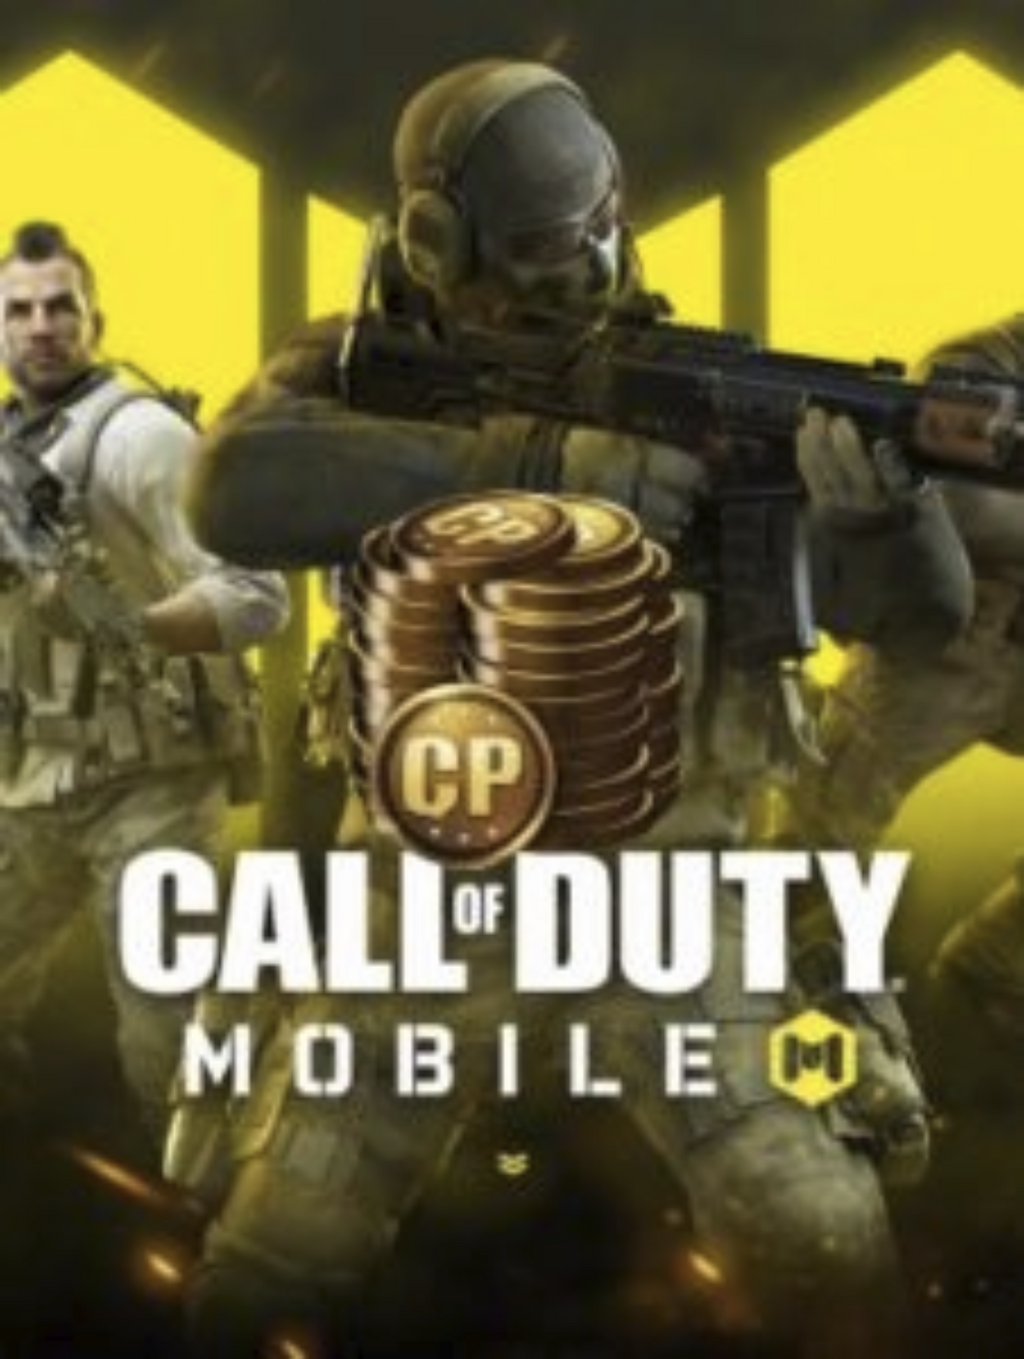 Call of Duty: Mobile 880 CP $10 global Activision login